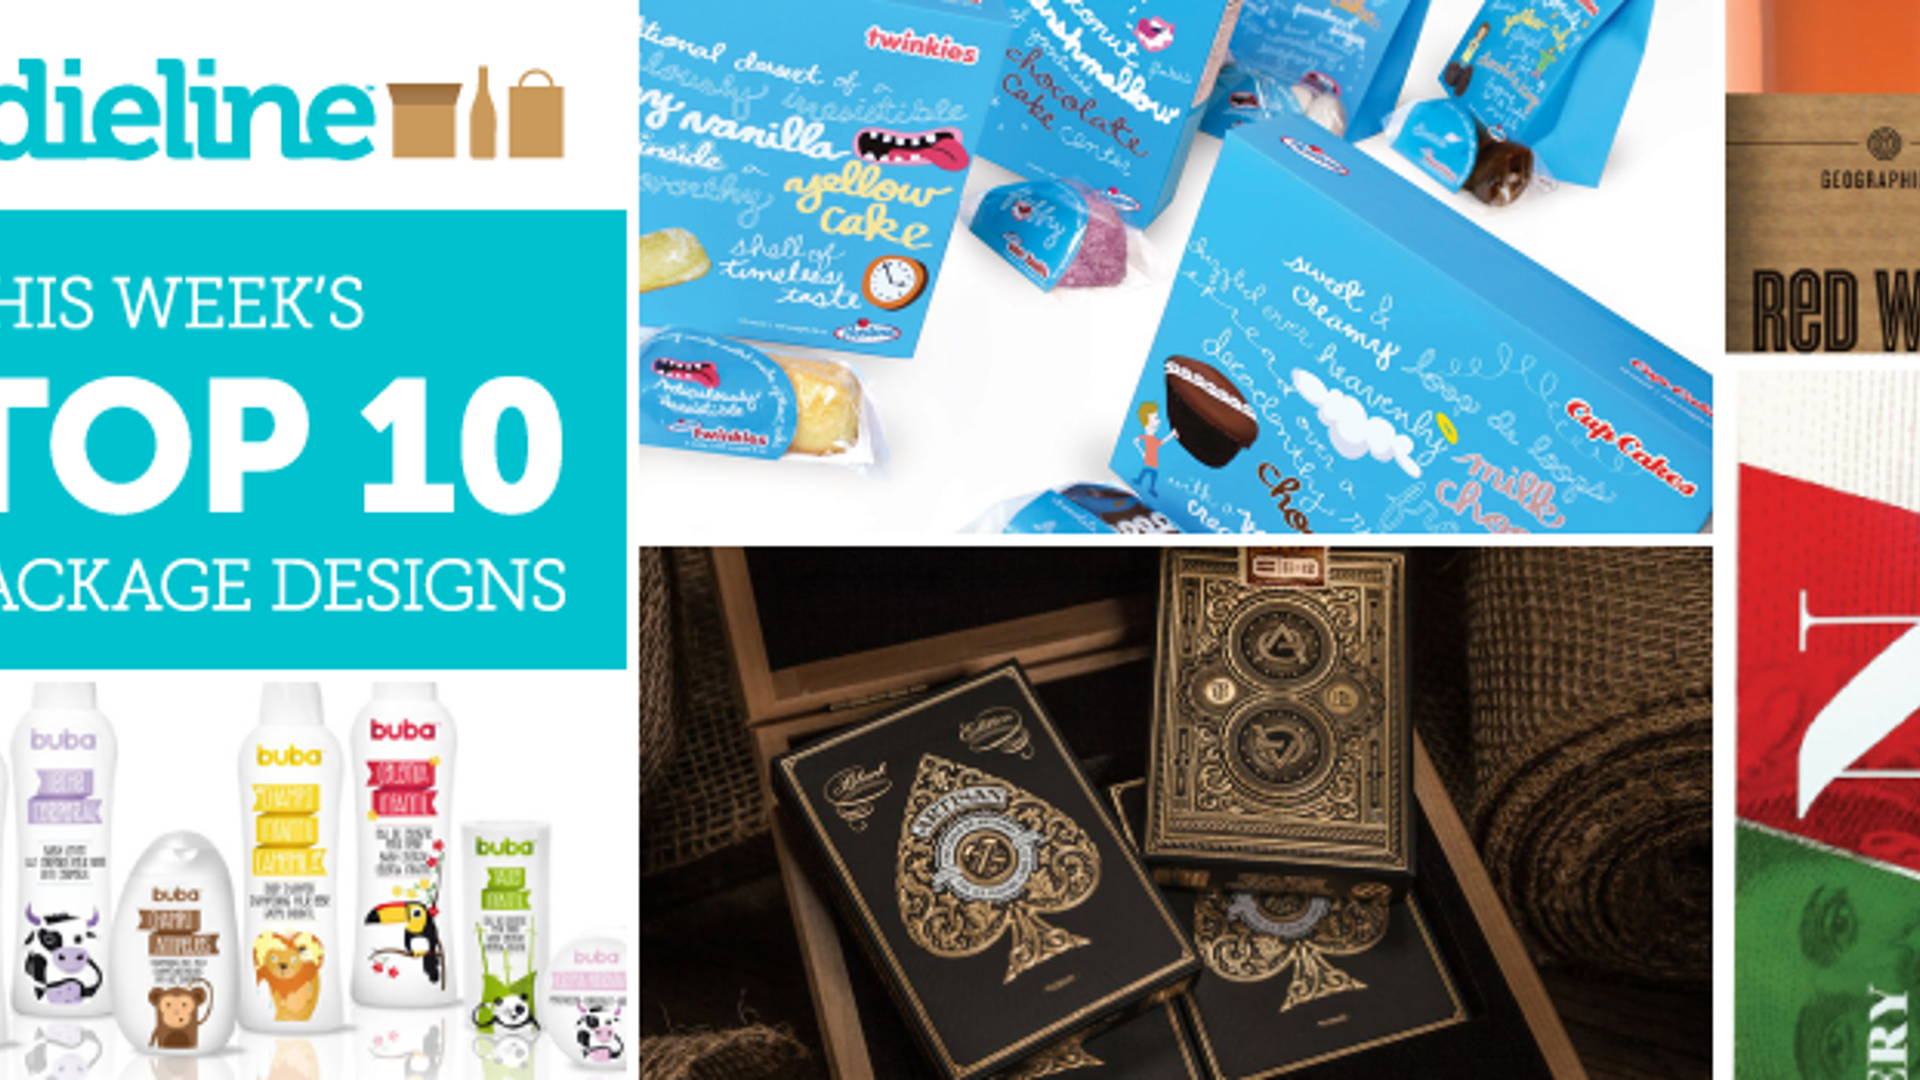 Featured image for This Week's Top 10 Package Design